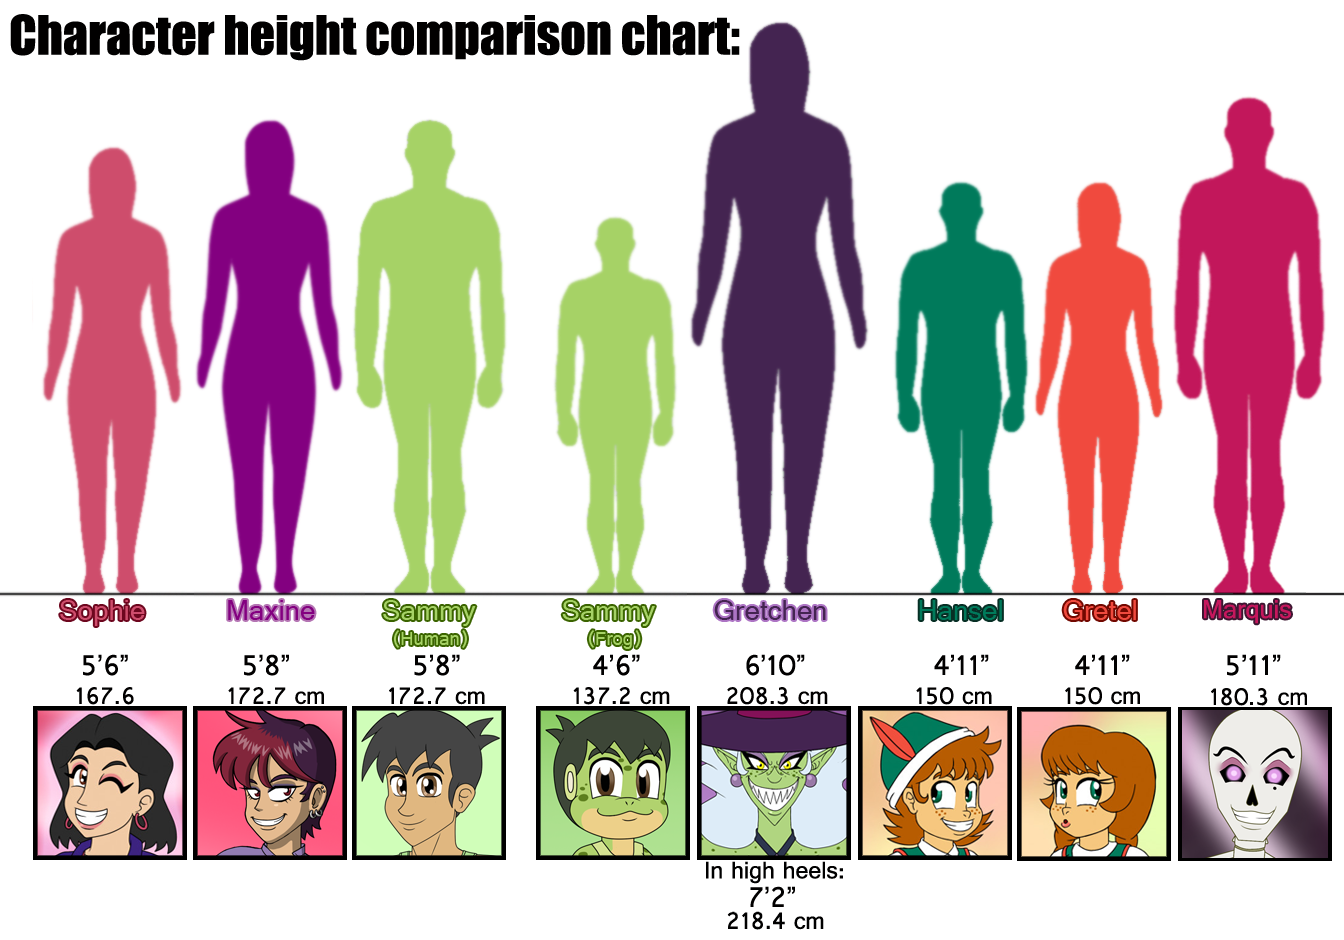 Height load. Height Comparison Chart. Height Comparison characters. Character height Chart. Comparing heights.